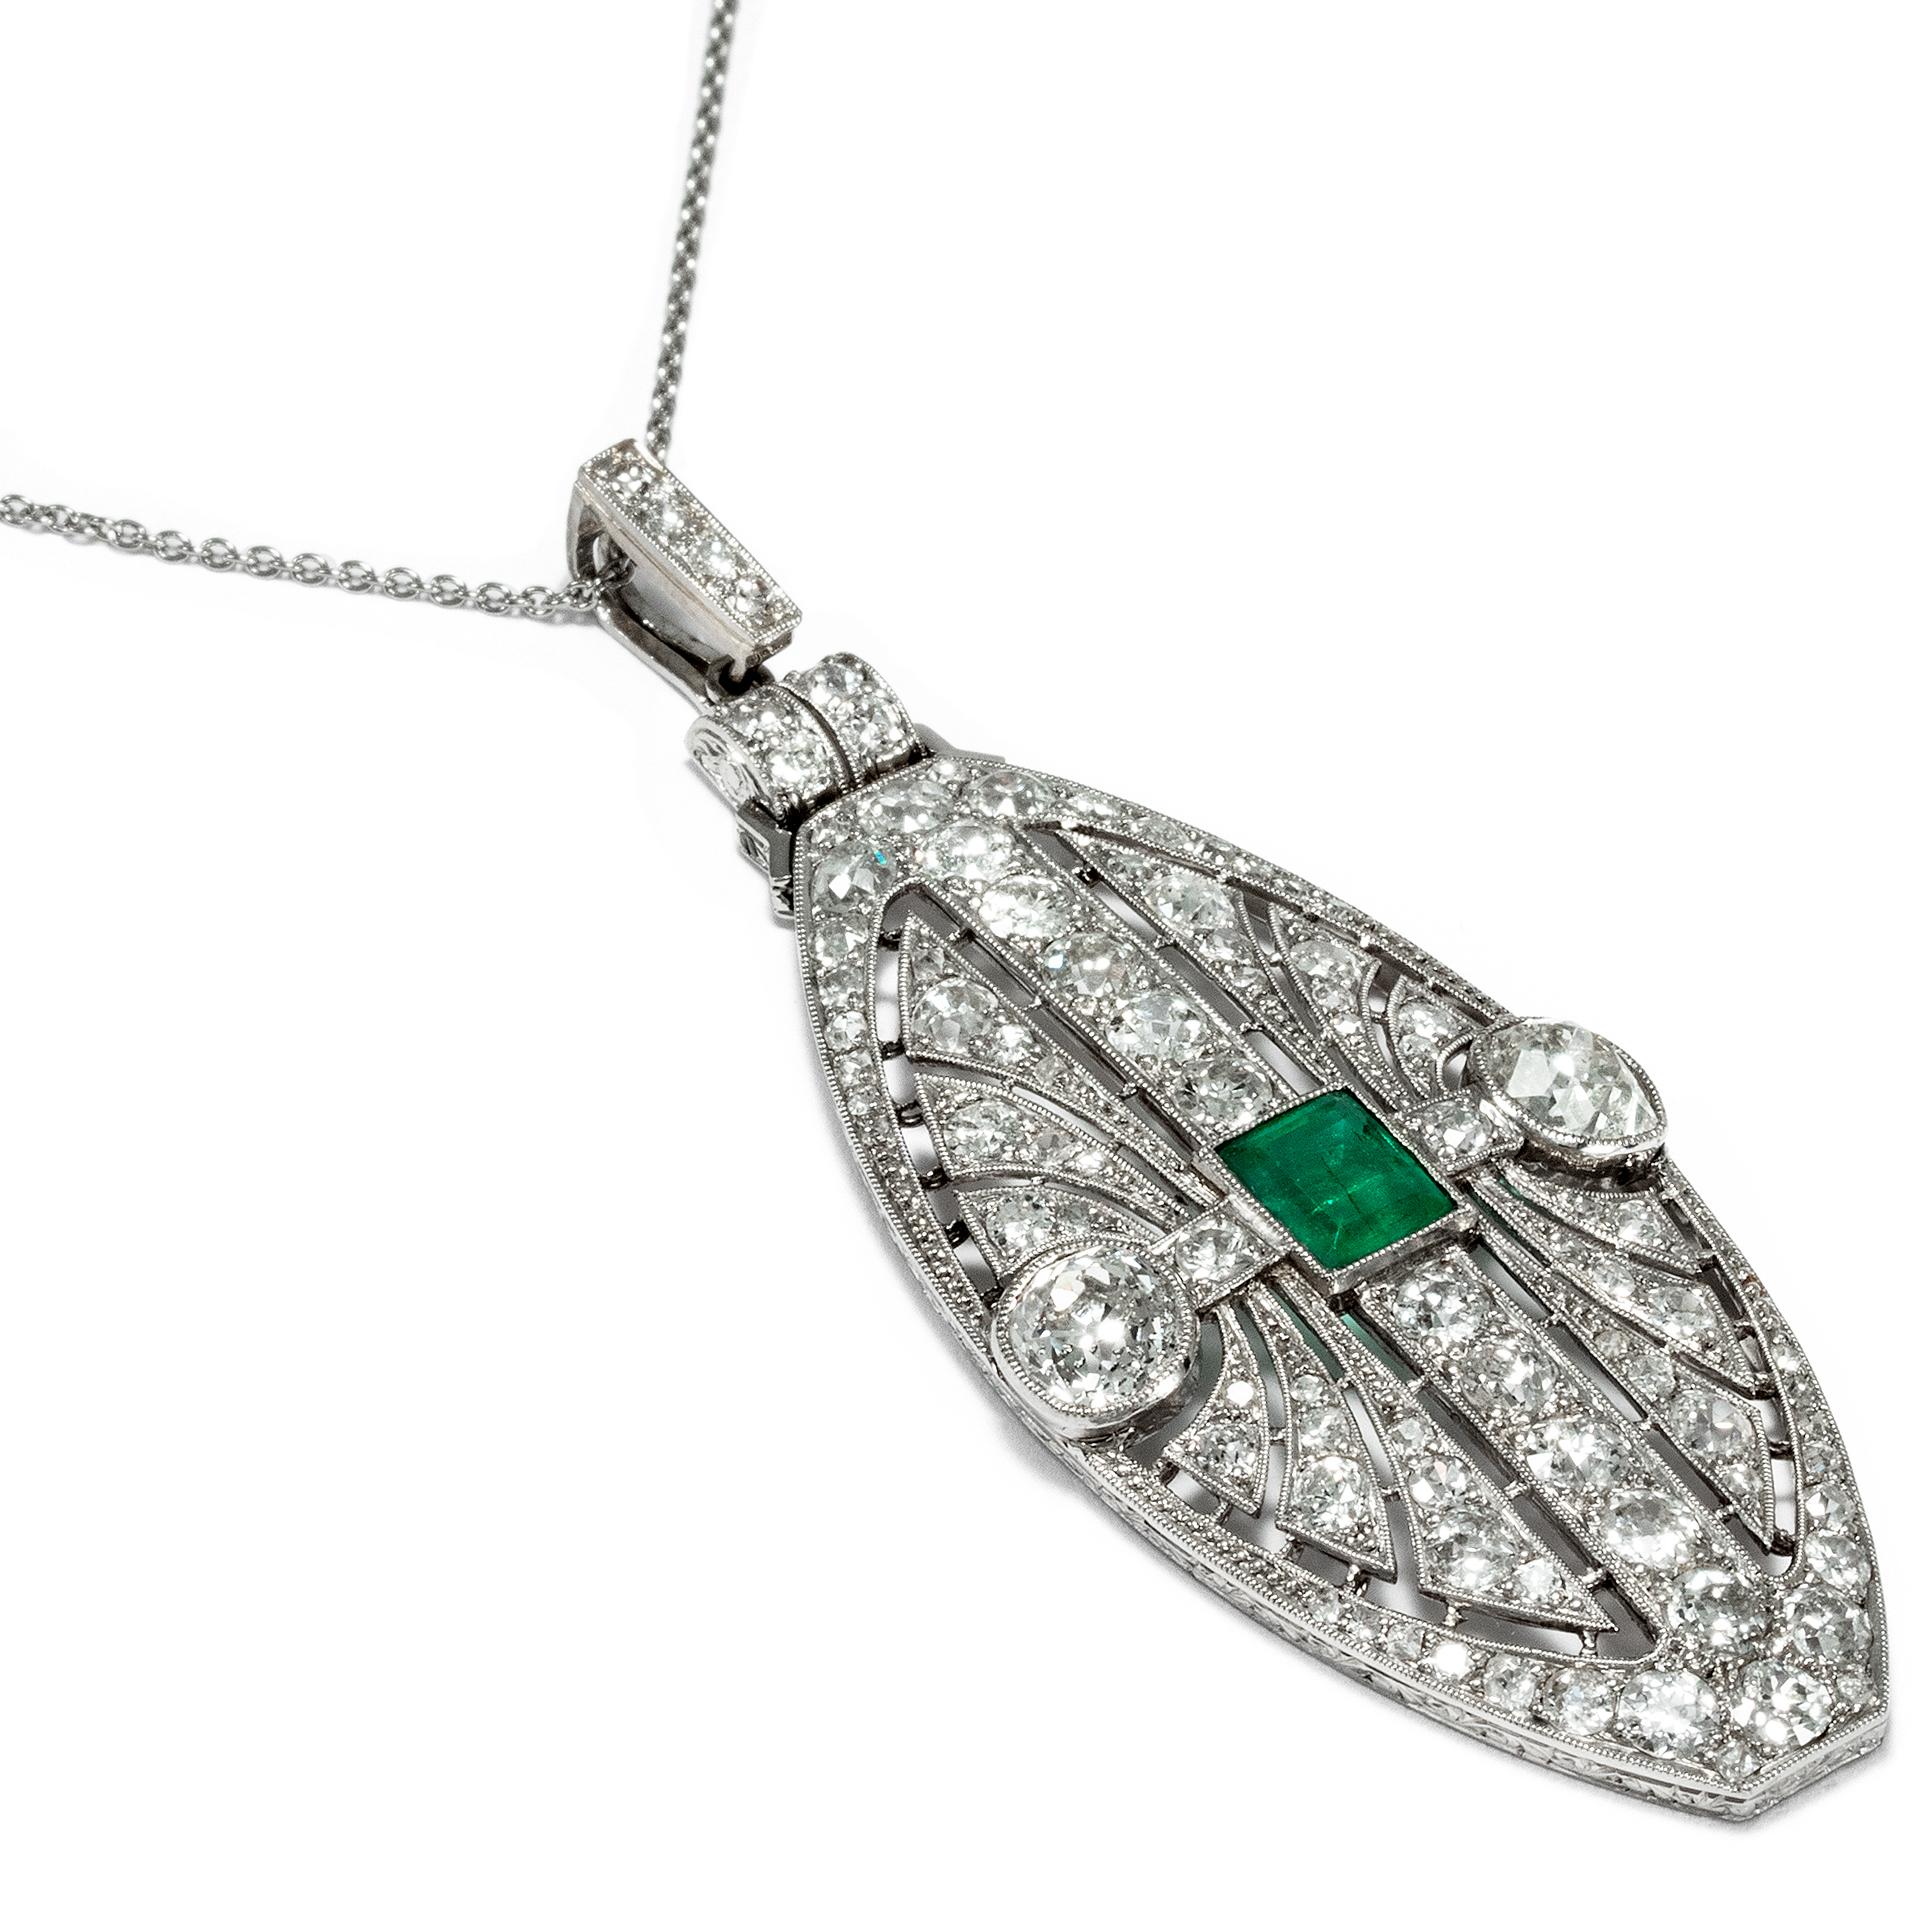 This exquisite pendant is a typical example of fine 1920s Art Déco jewellery. With its large shield form, it is perfectly suited to showcase the exceedingly painstaking detail in which the best of the era's goldsmiths were able to execute their